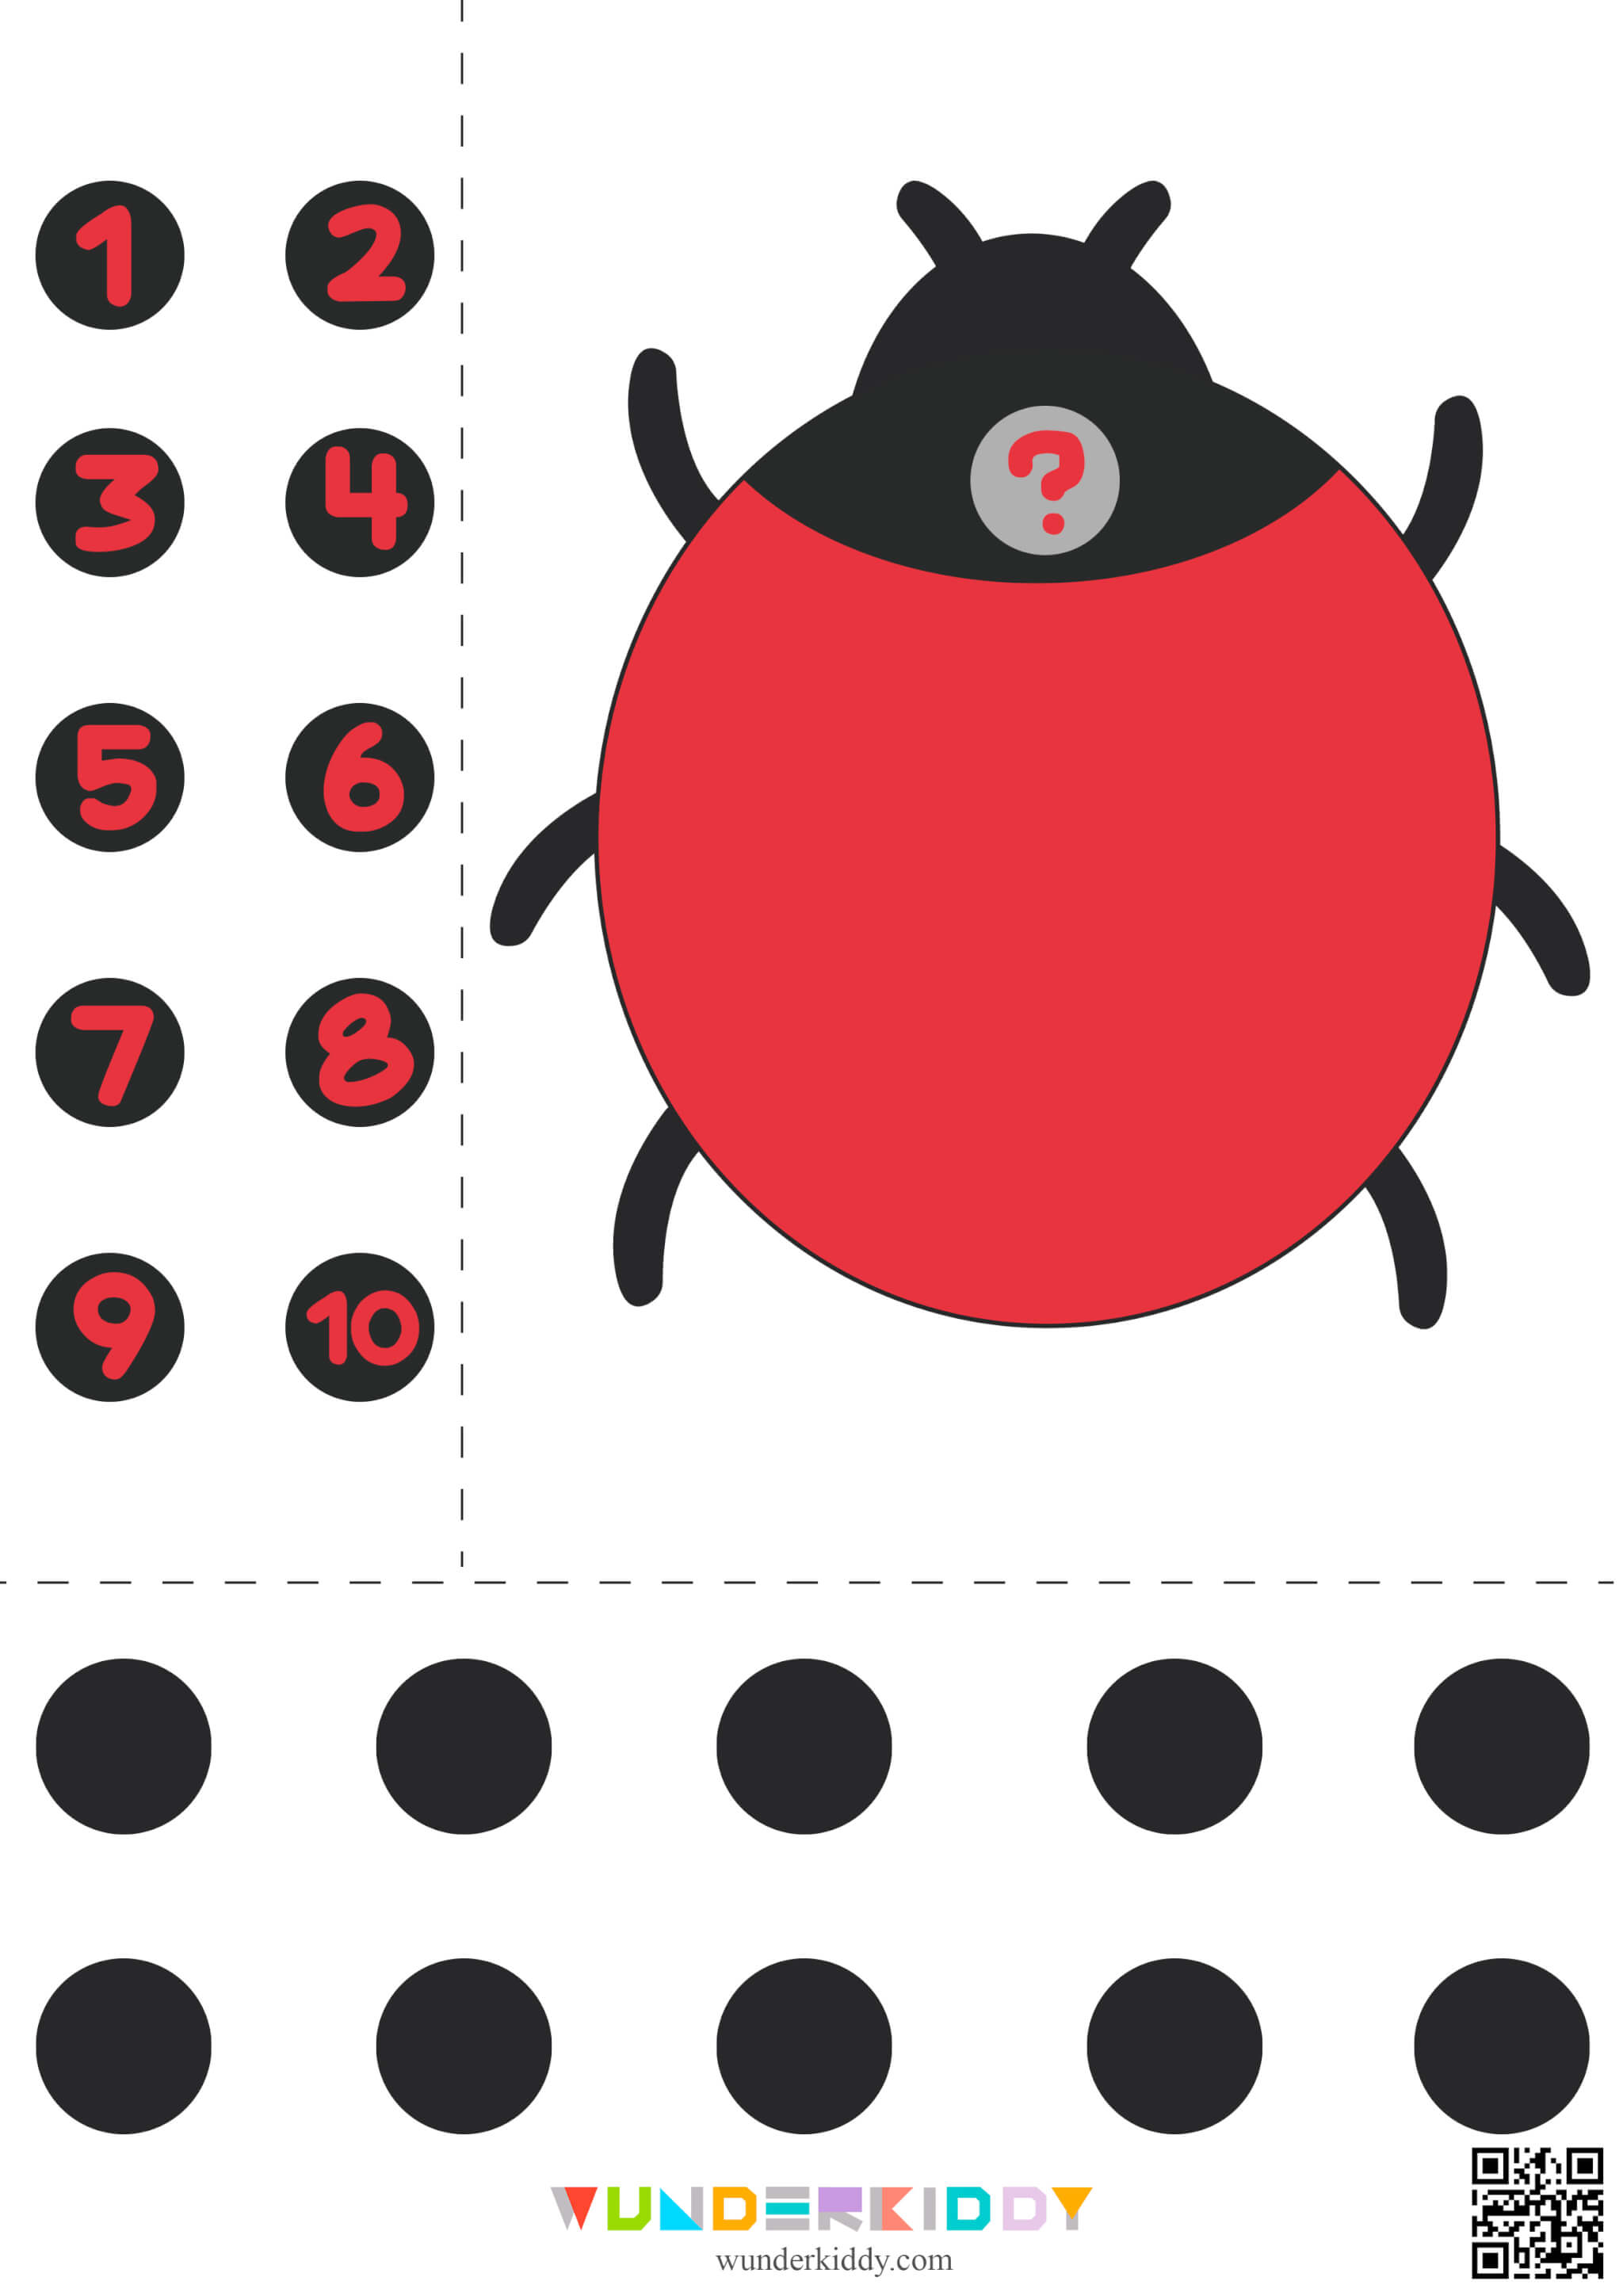 Ladybug Activity and Templates for Kids - Image 4